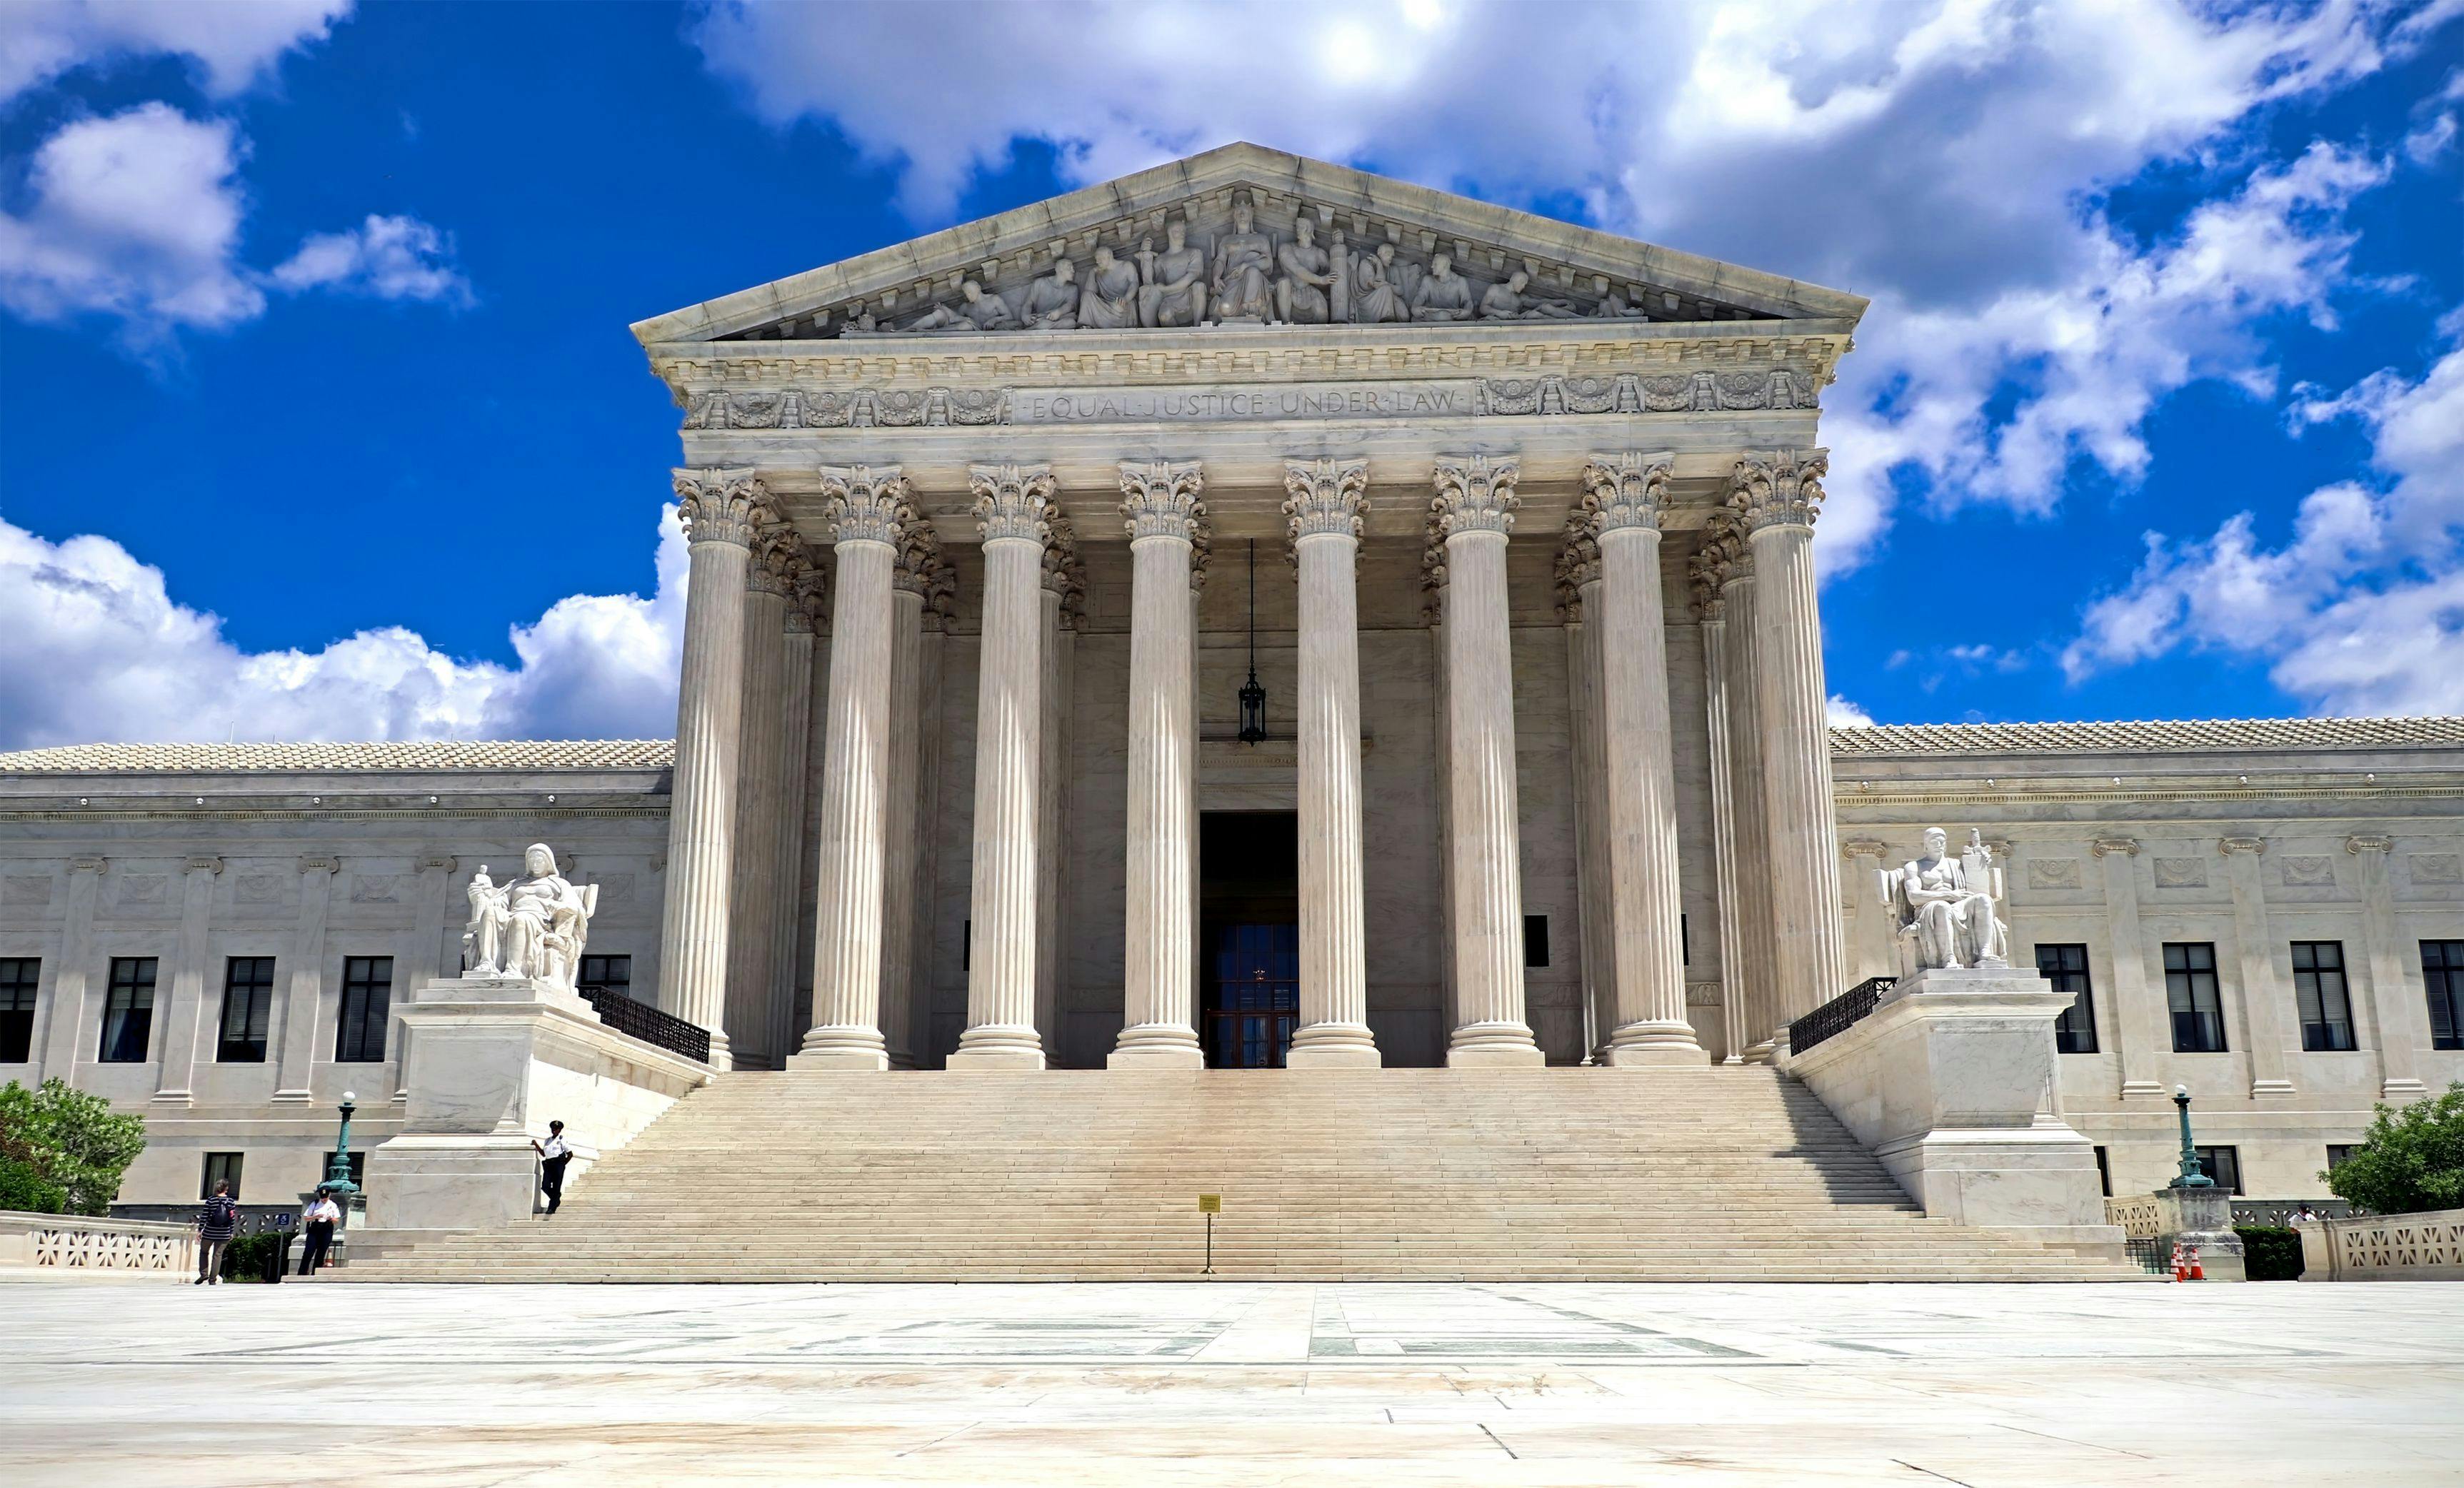 The 6-3 majority decision of the Supreme Court sent shockwaves across the country. Image Credit: Adobe Stock - Jim Glab